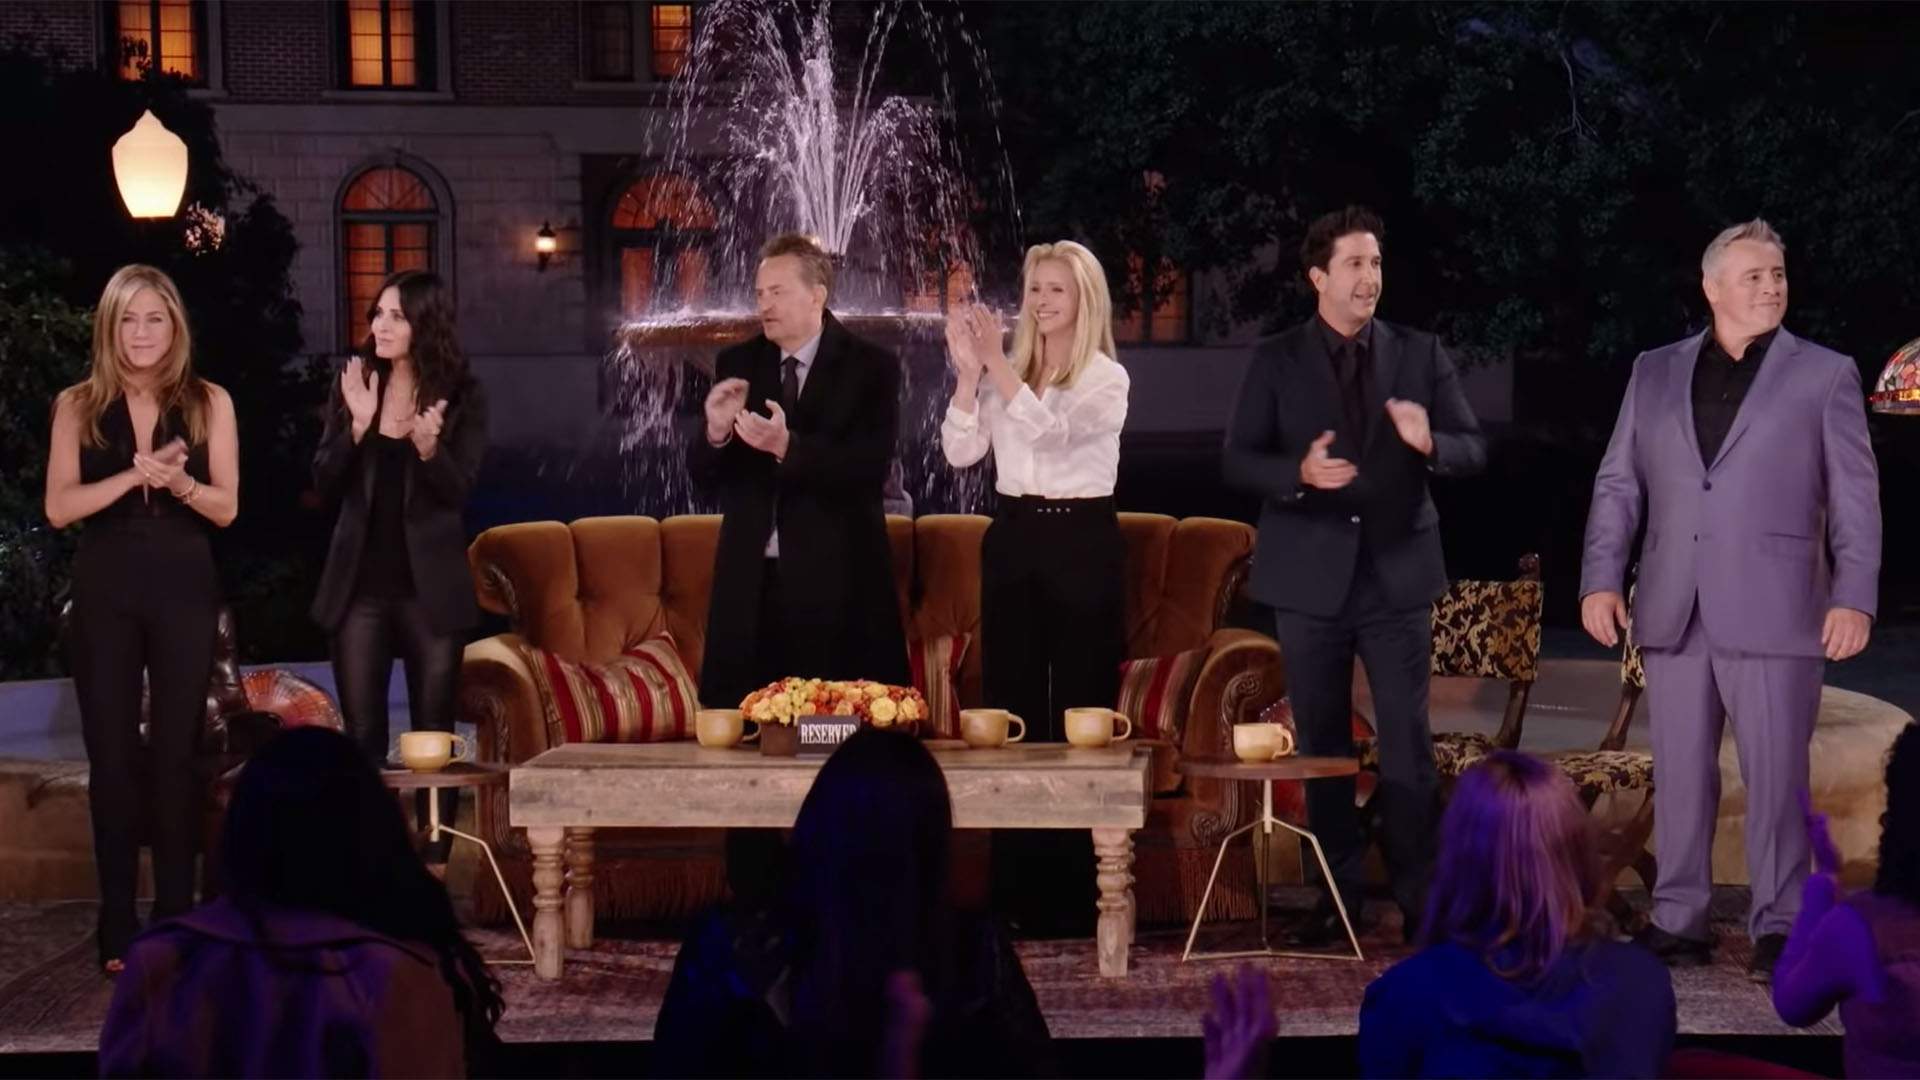 The 'Friends' Cast Reteams for Trivia and Nostalgia in the Full Trailer for HBO's Reunion Special